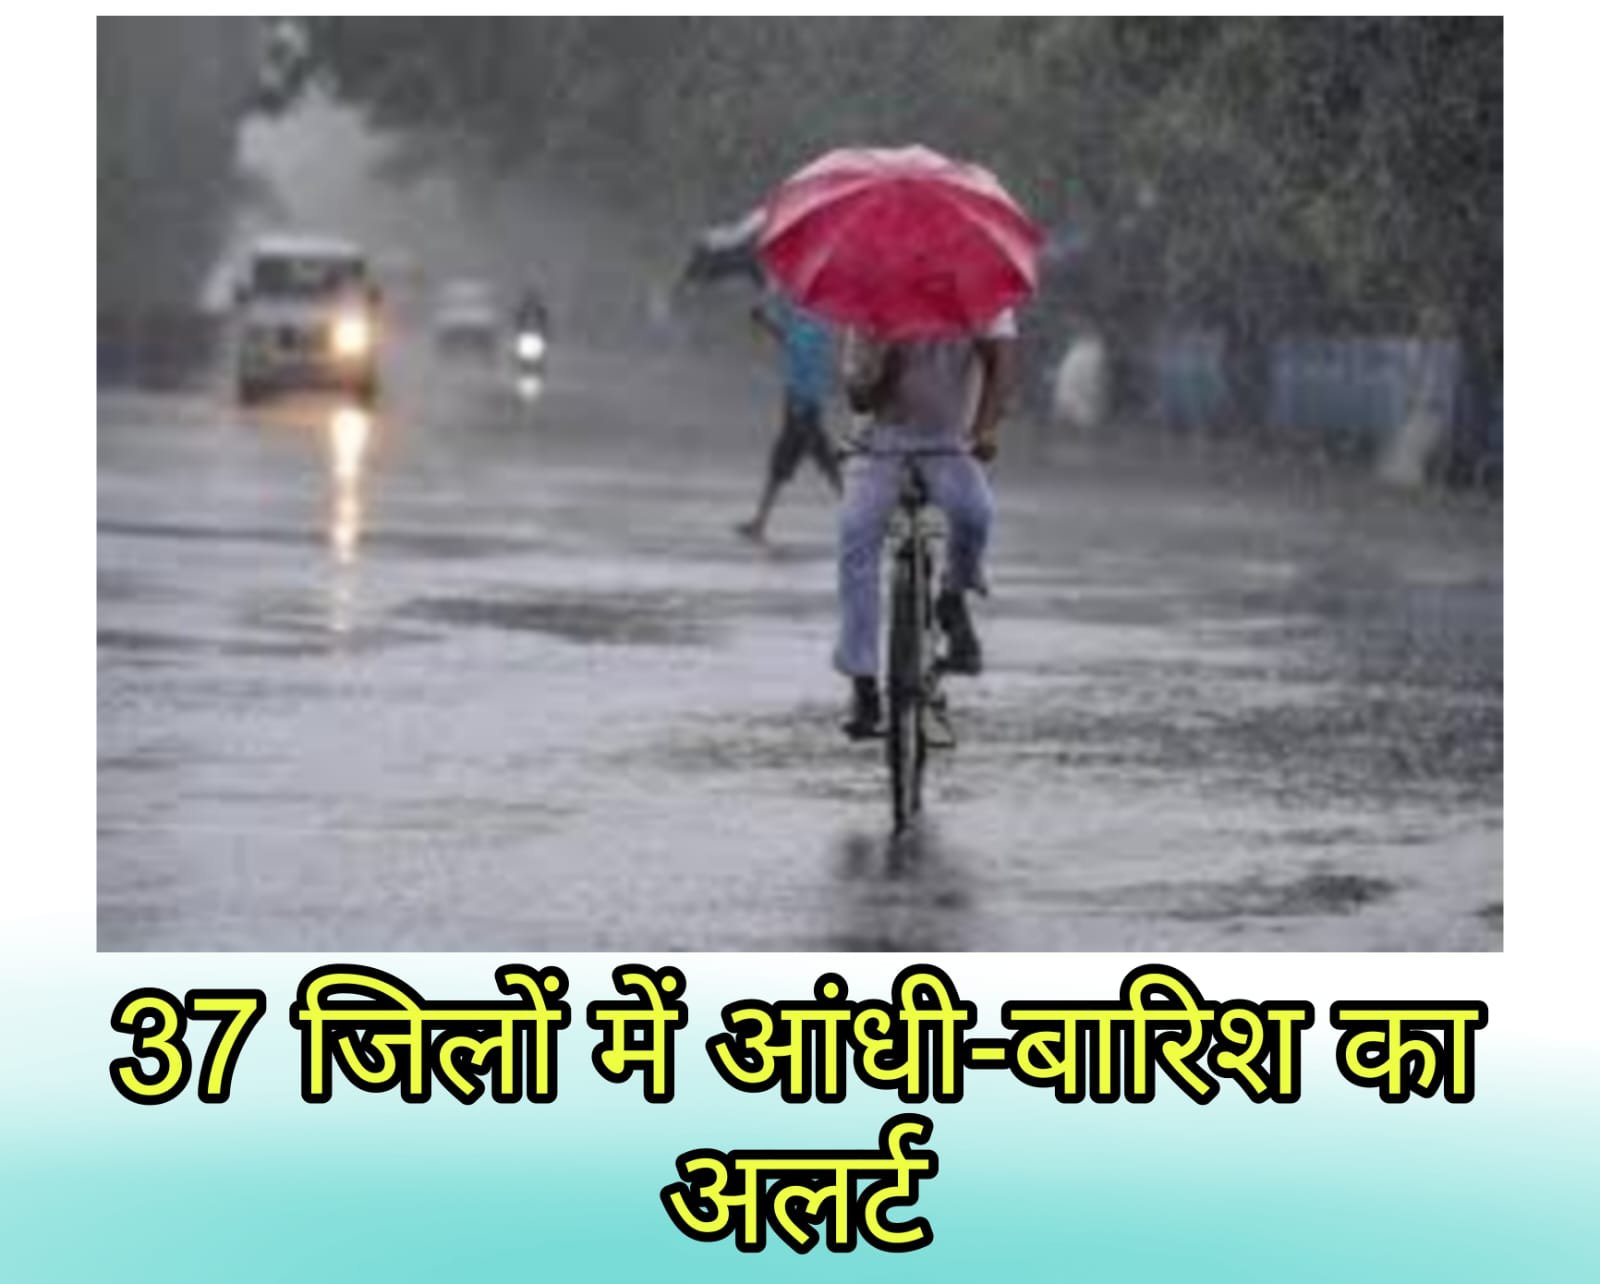 MP Weather Update: Thunderstorm alert in 37 districts of the state, two colors of weather will be seen